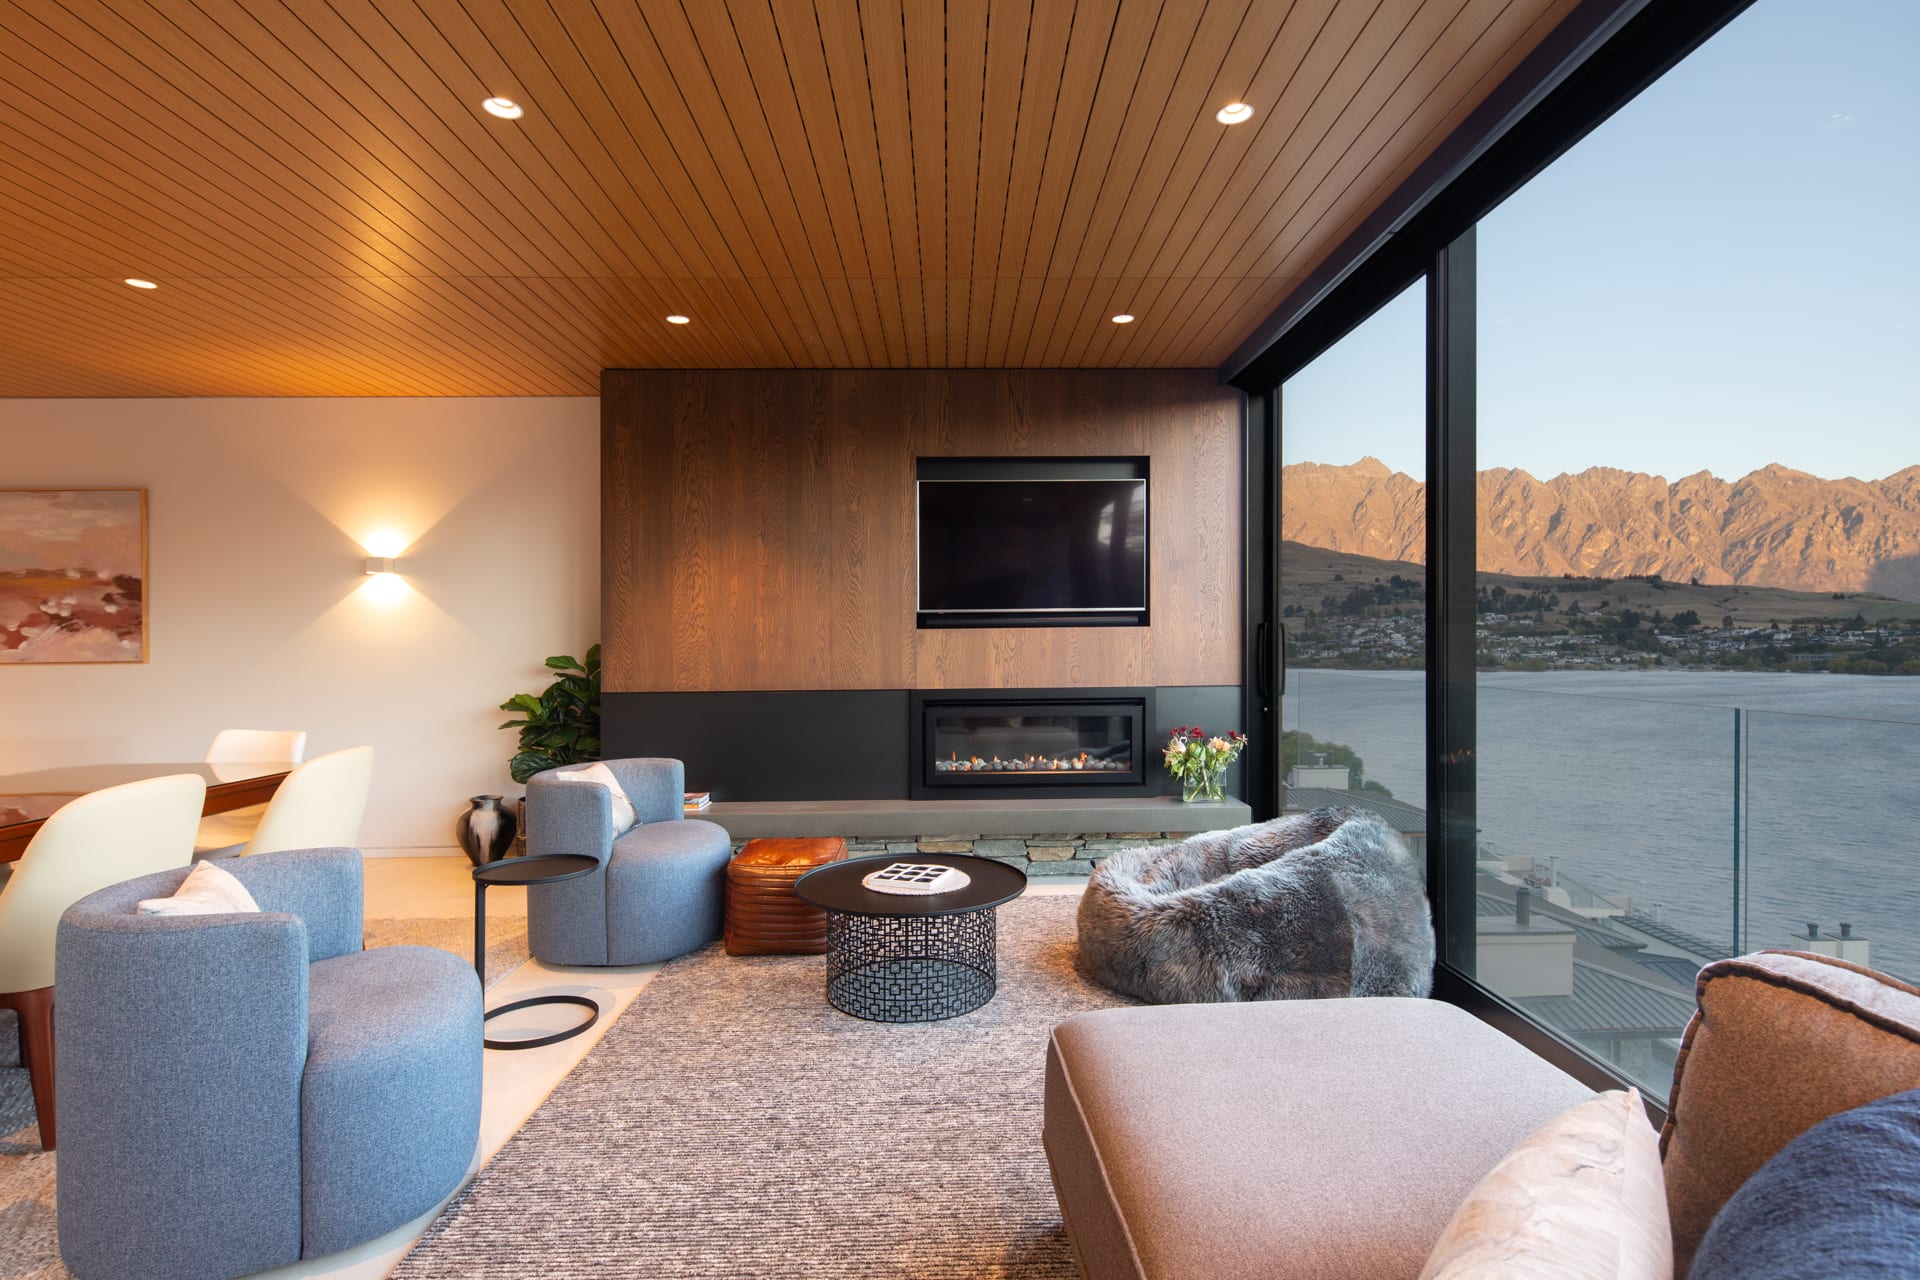 Fireplace and TV with the Remarkable mountain range in the background